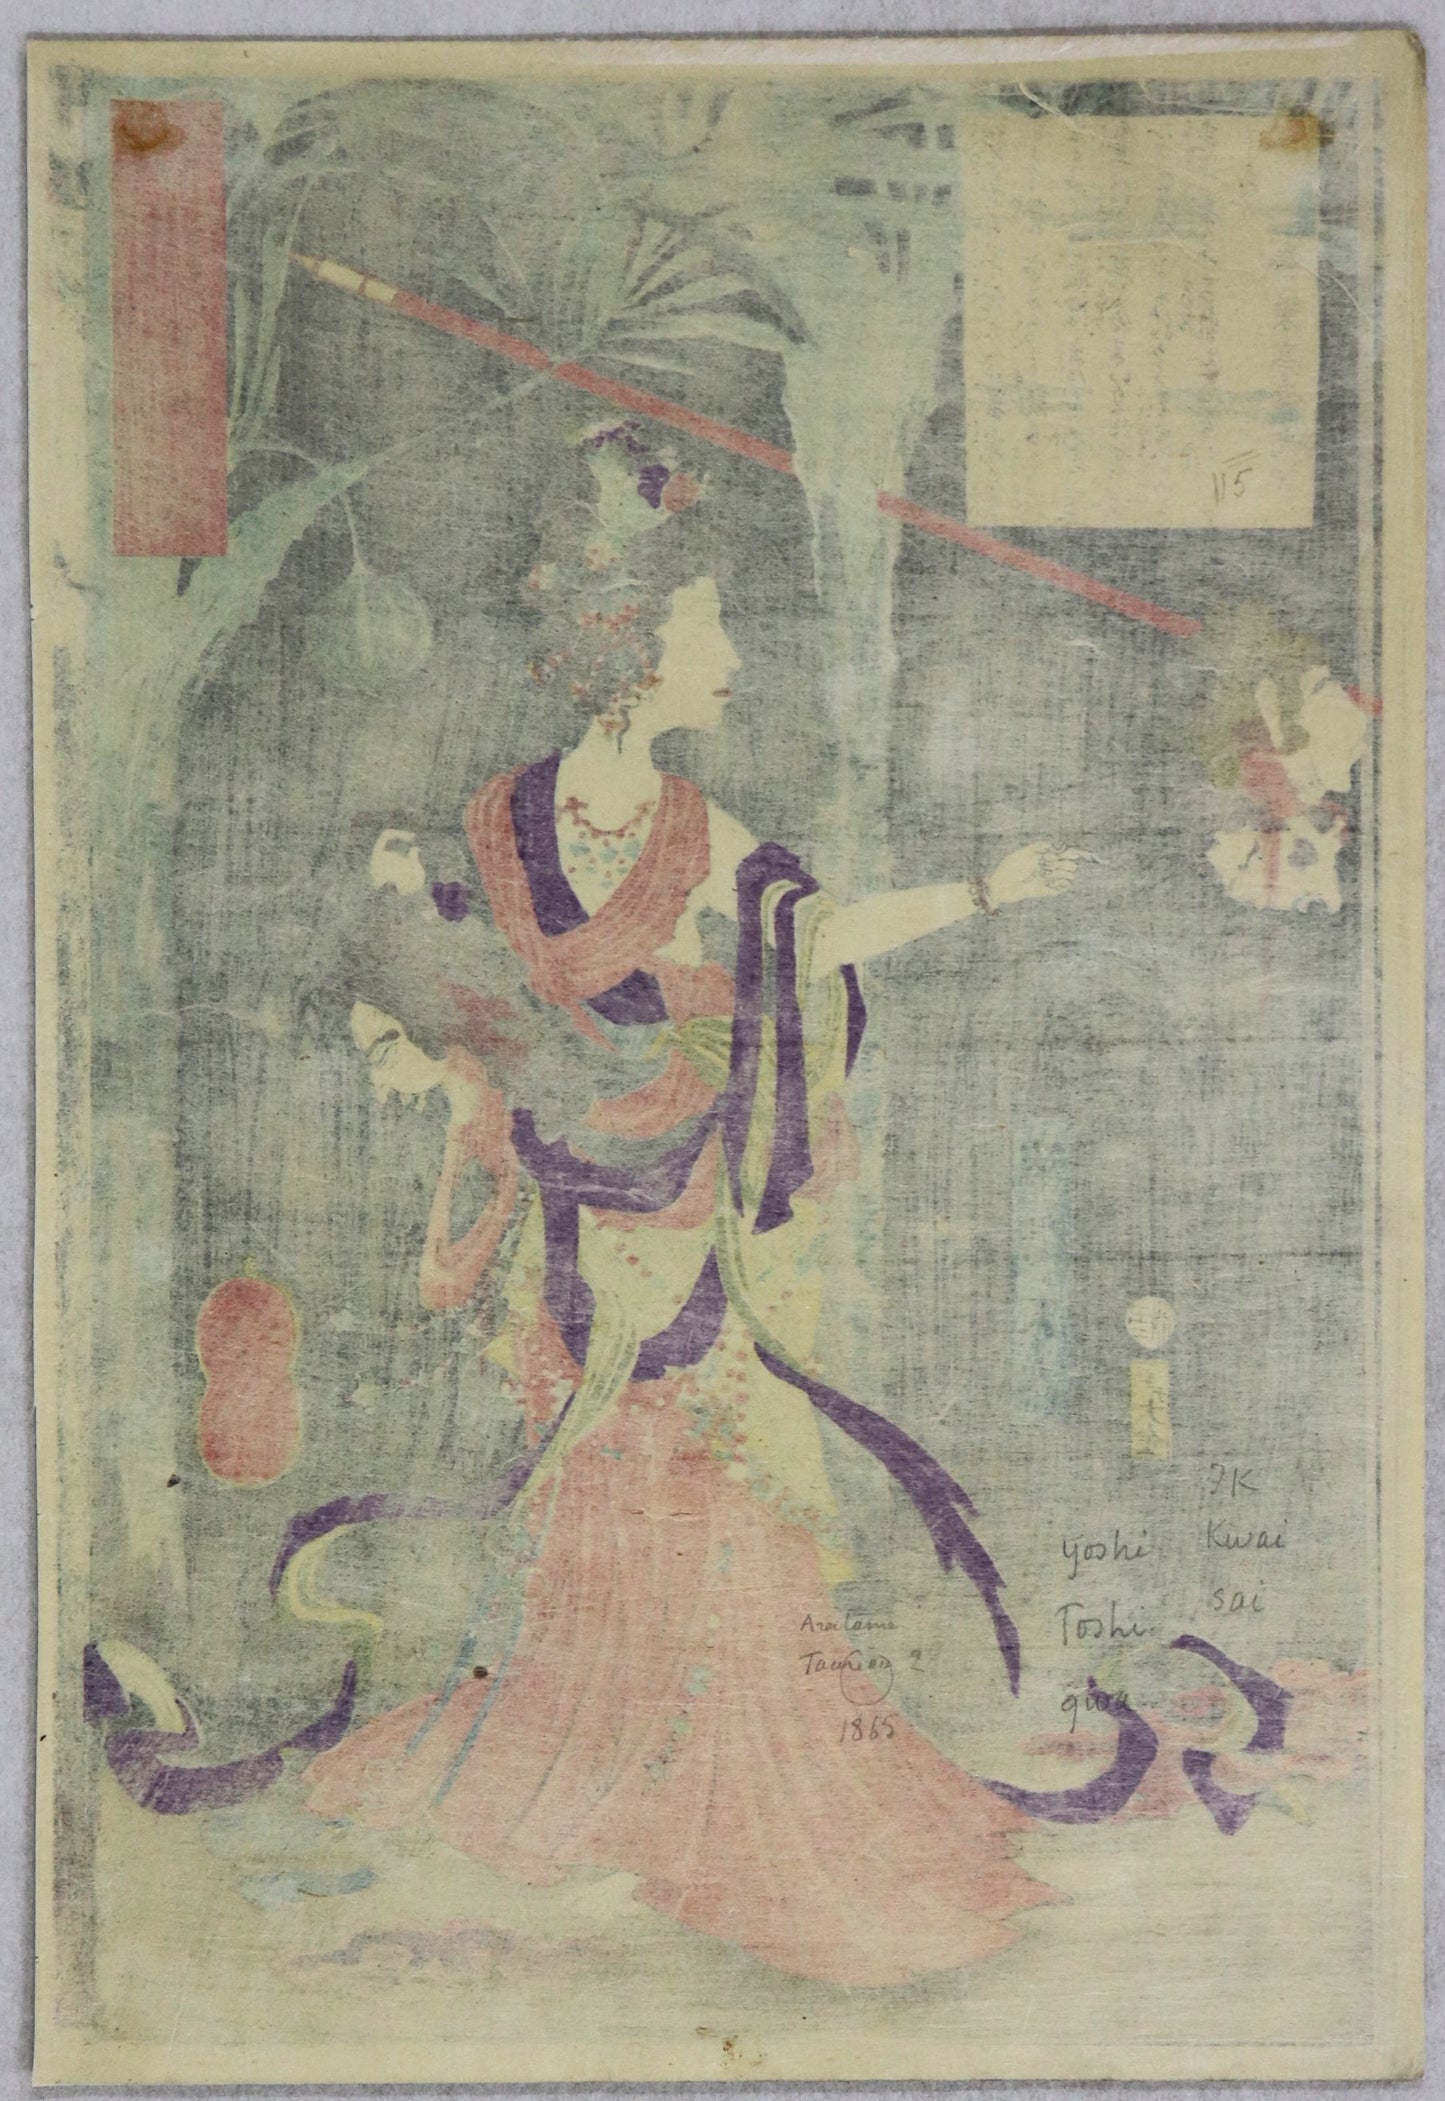 Lady Kayô from the series "One hundred Tales of Japan and China" by Yoshitoshi / Lady Kayô de la série "Cent Contes du Japon et de Chine " par Yoshitoshi (1865)